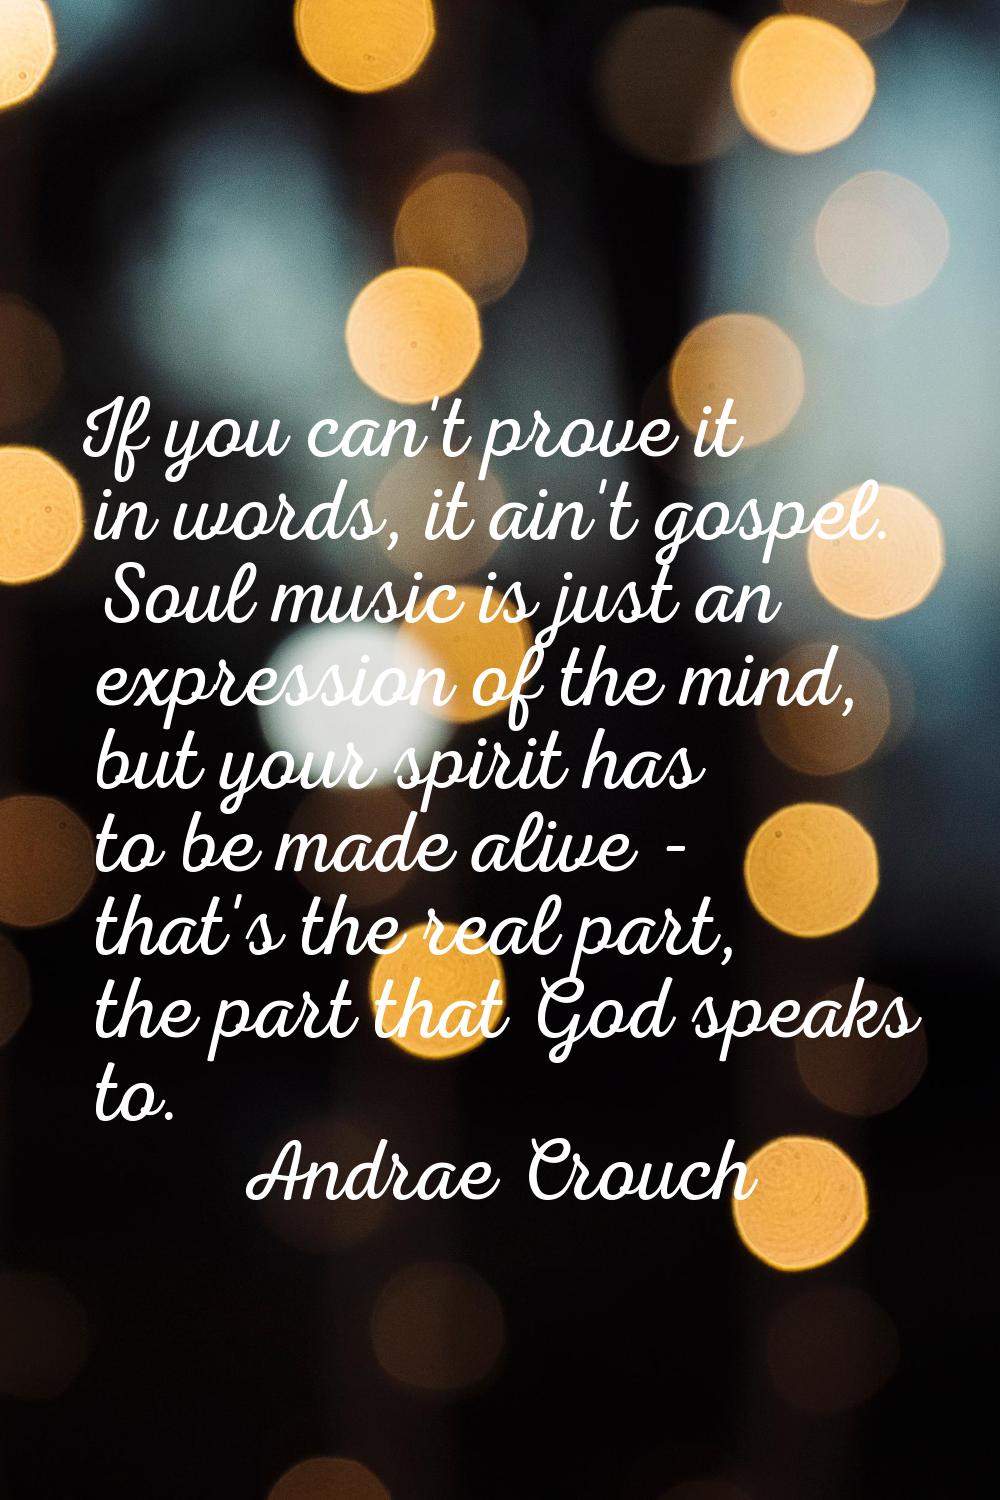 If you can't prove it in words, it ain't gospel. Soul music is just an expression of the mind, but 